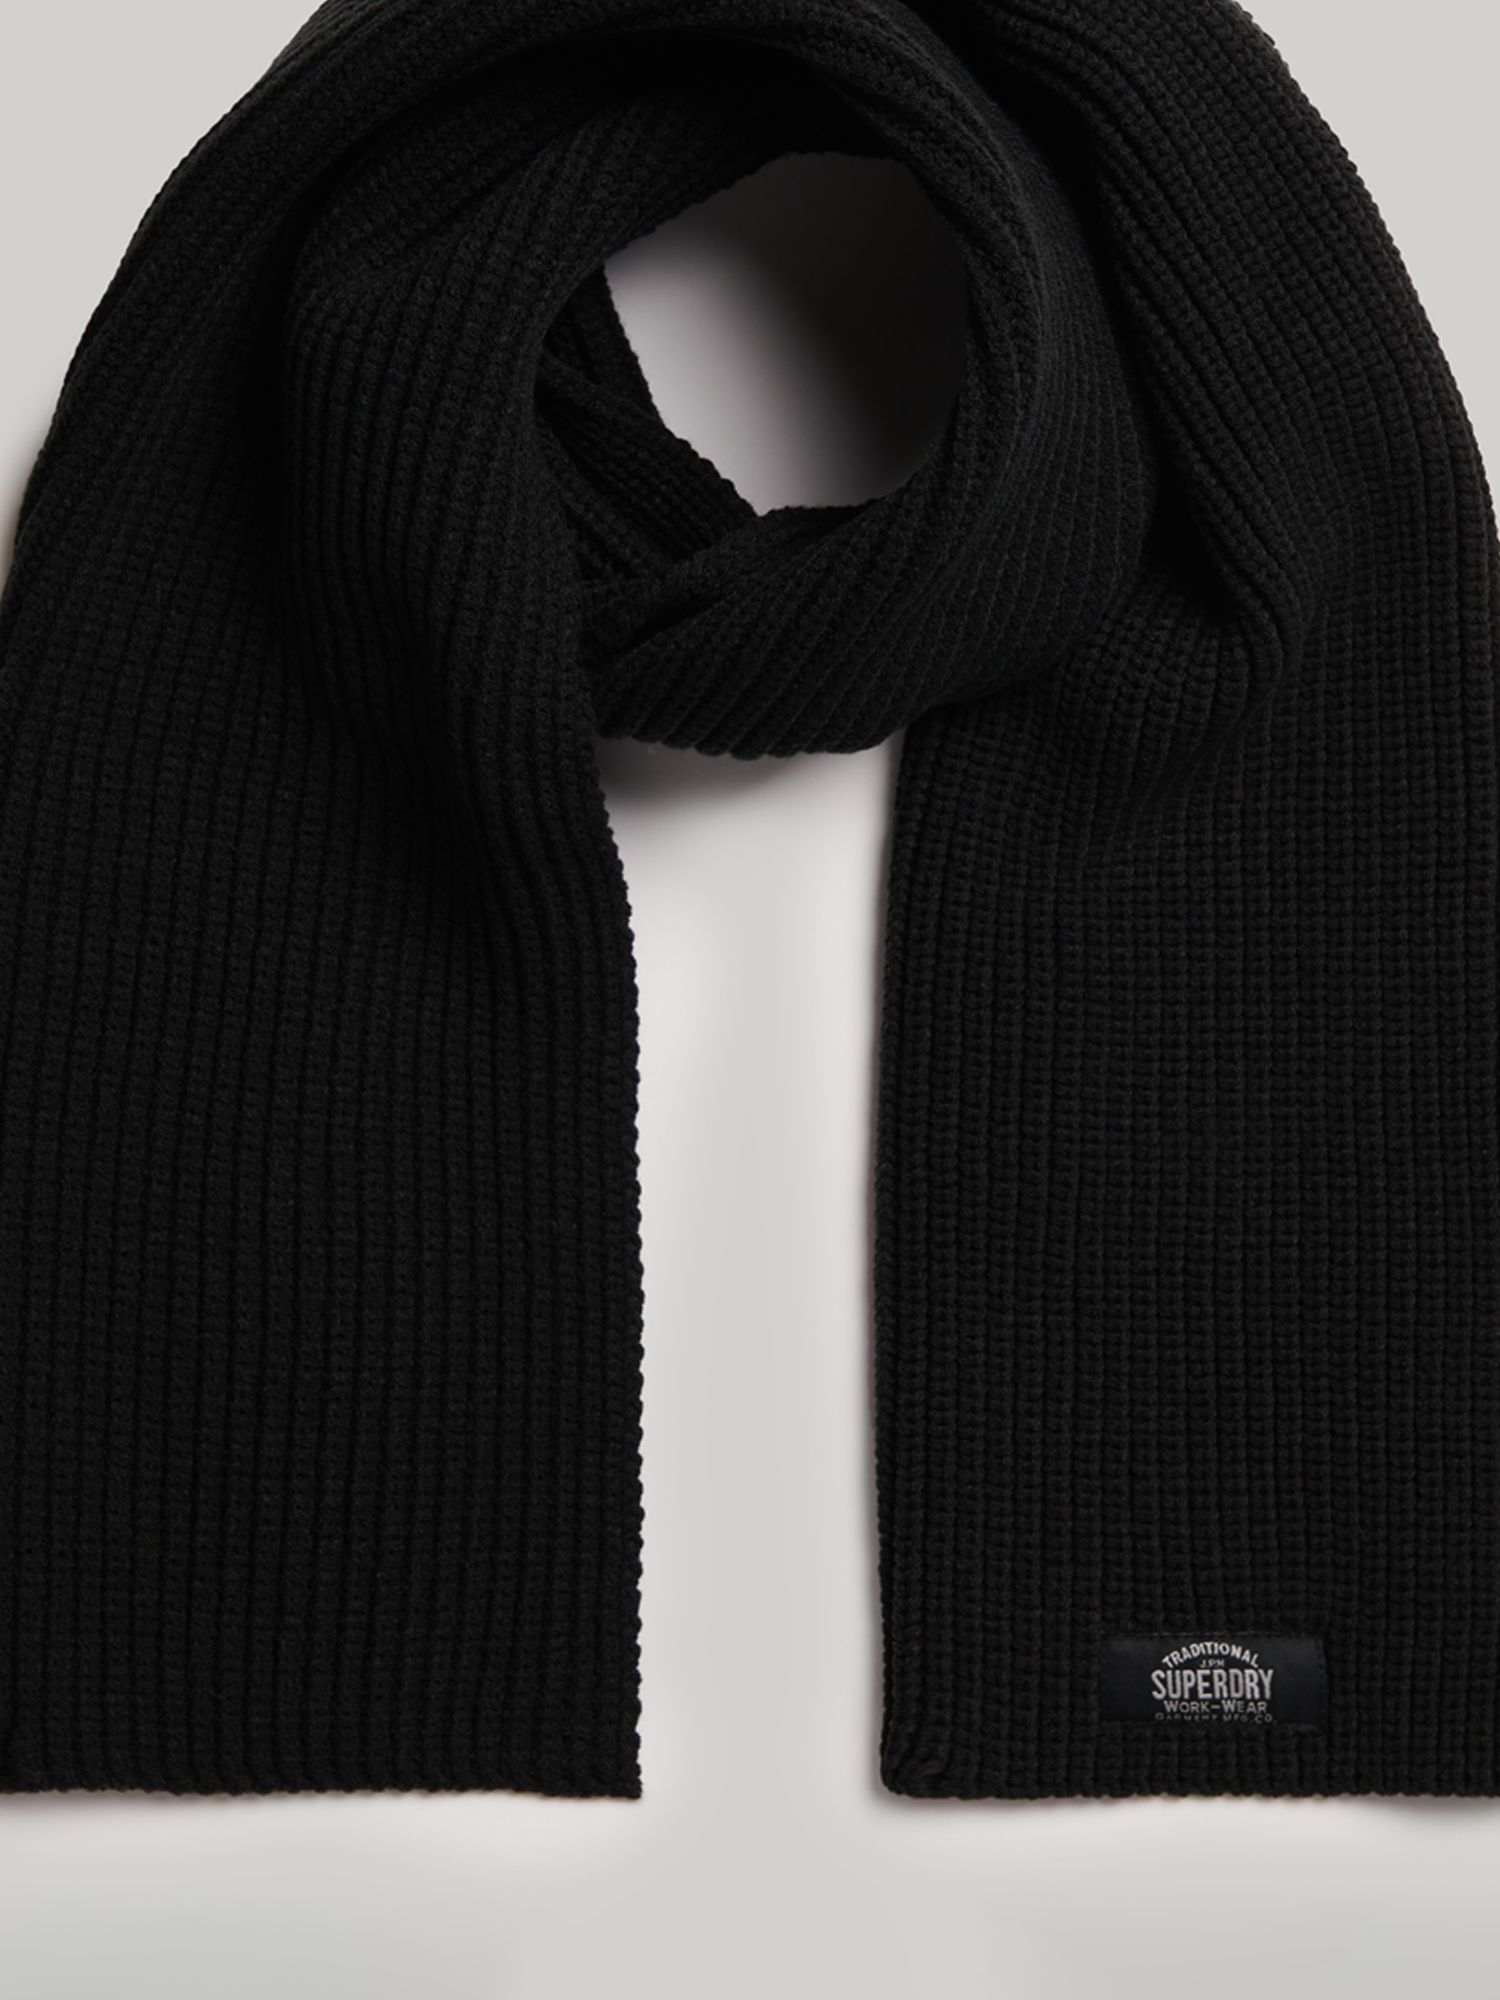 Superdry Classic Knit Scarf at John Lewis & Partners